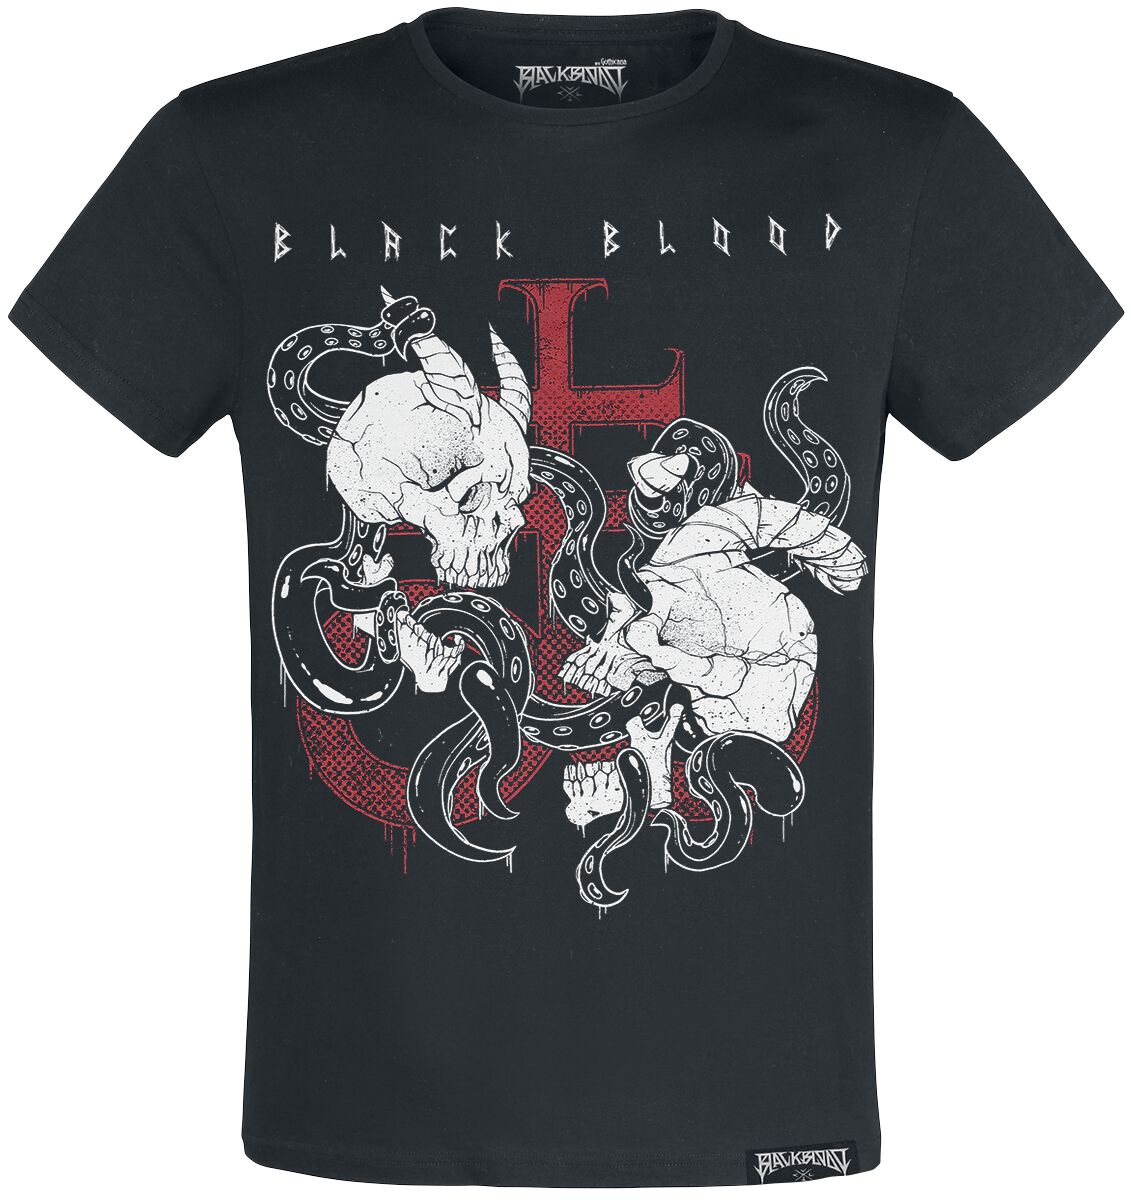 Black Blood by Gothicana T-Shirt with Demon Skull Print T-Shirt schwarz in M